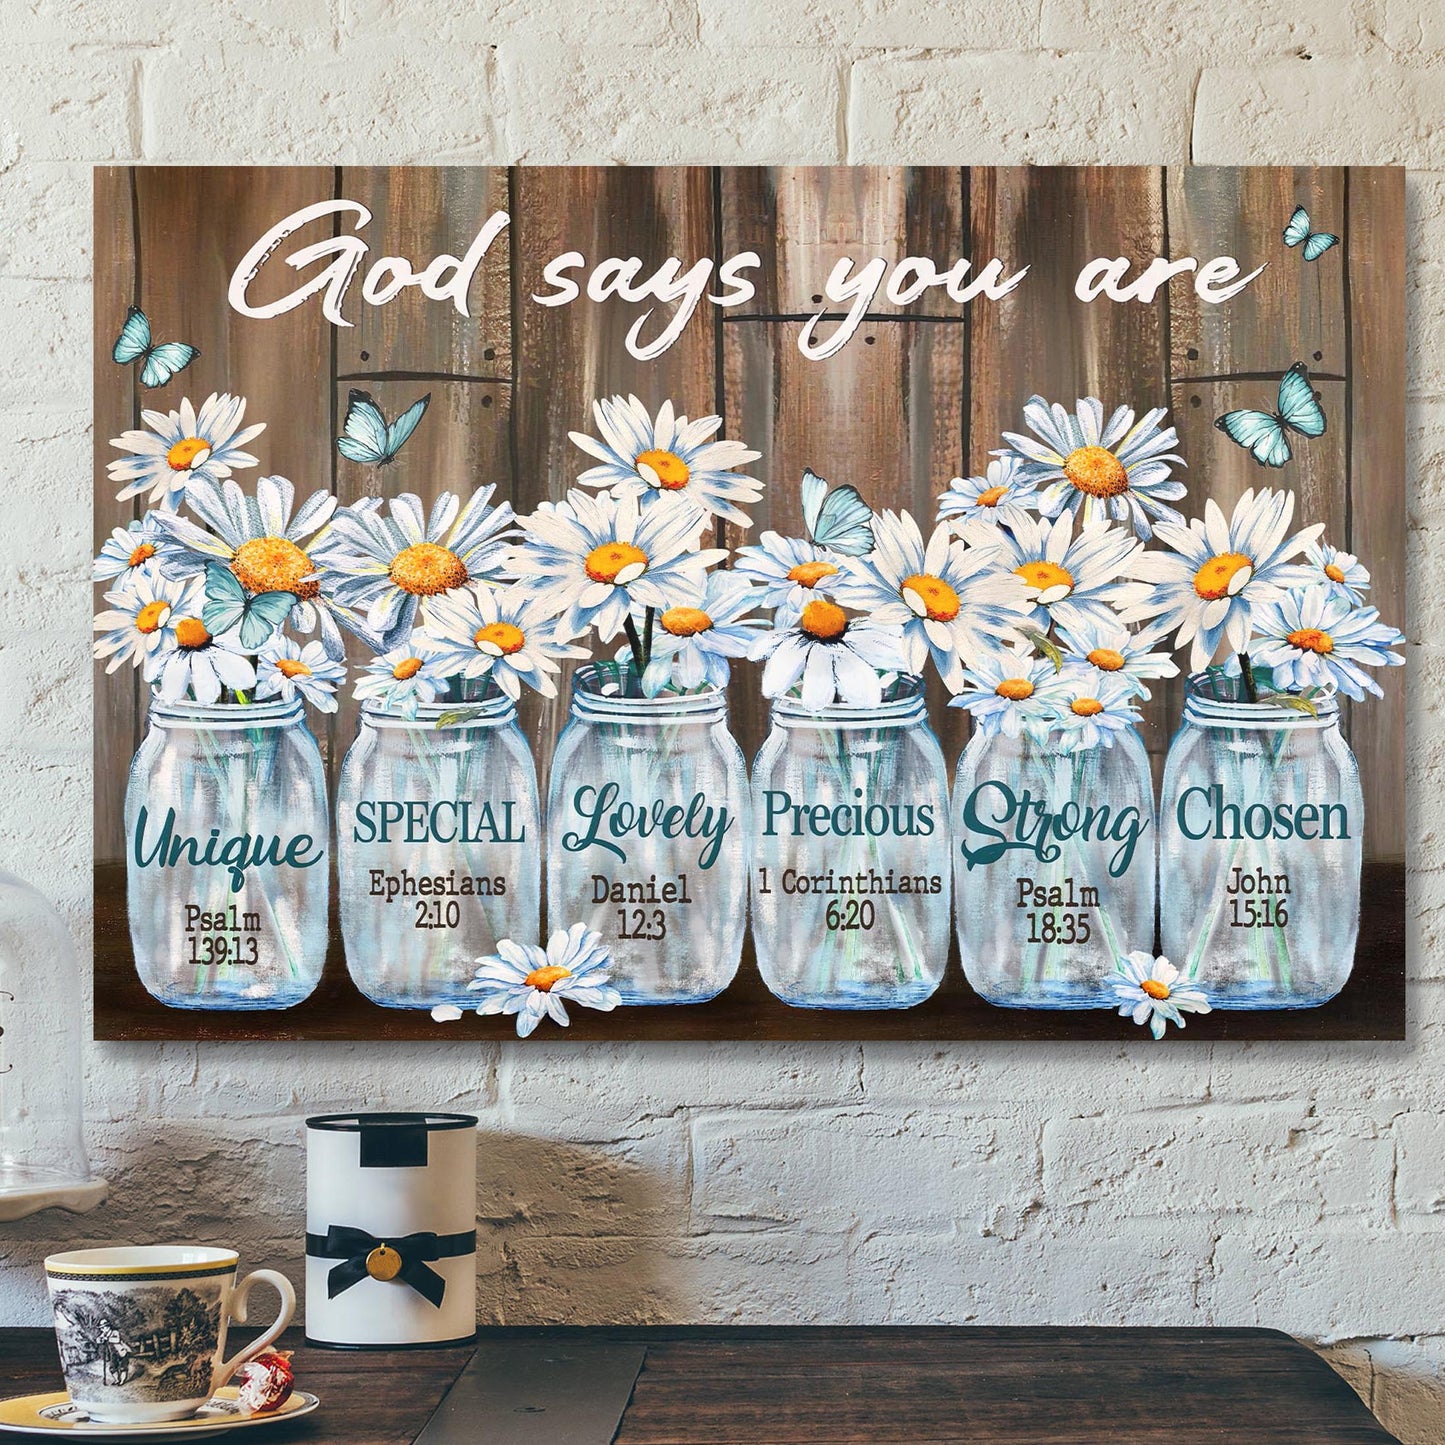 Daisy Flower In Glass Jar - God Says You Are Canvas Wall Art - Bible Verse Canvas - Scripture Canvas Wall Art - Ciaocustom